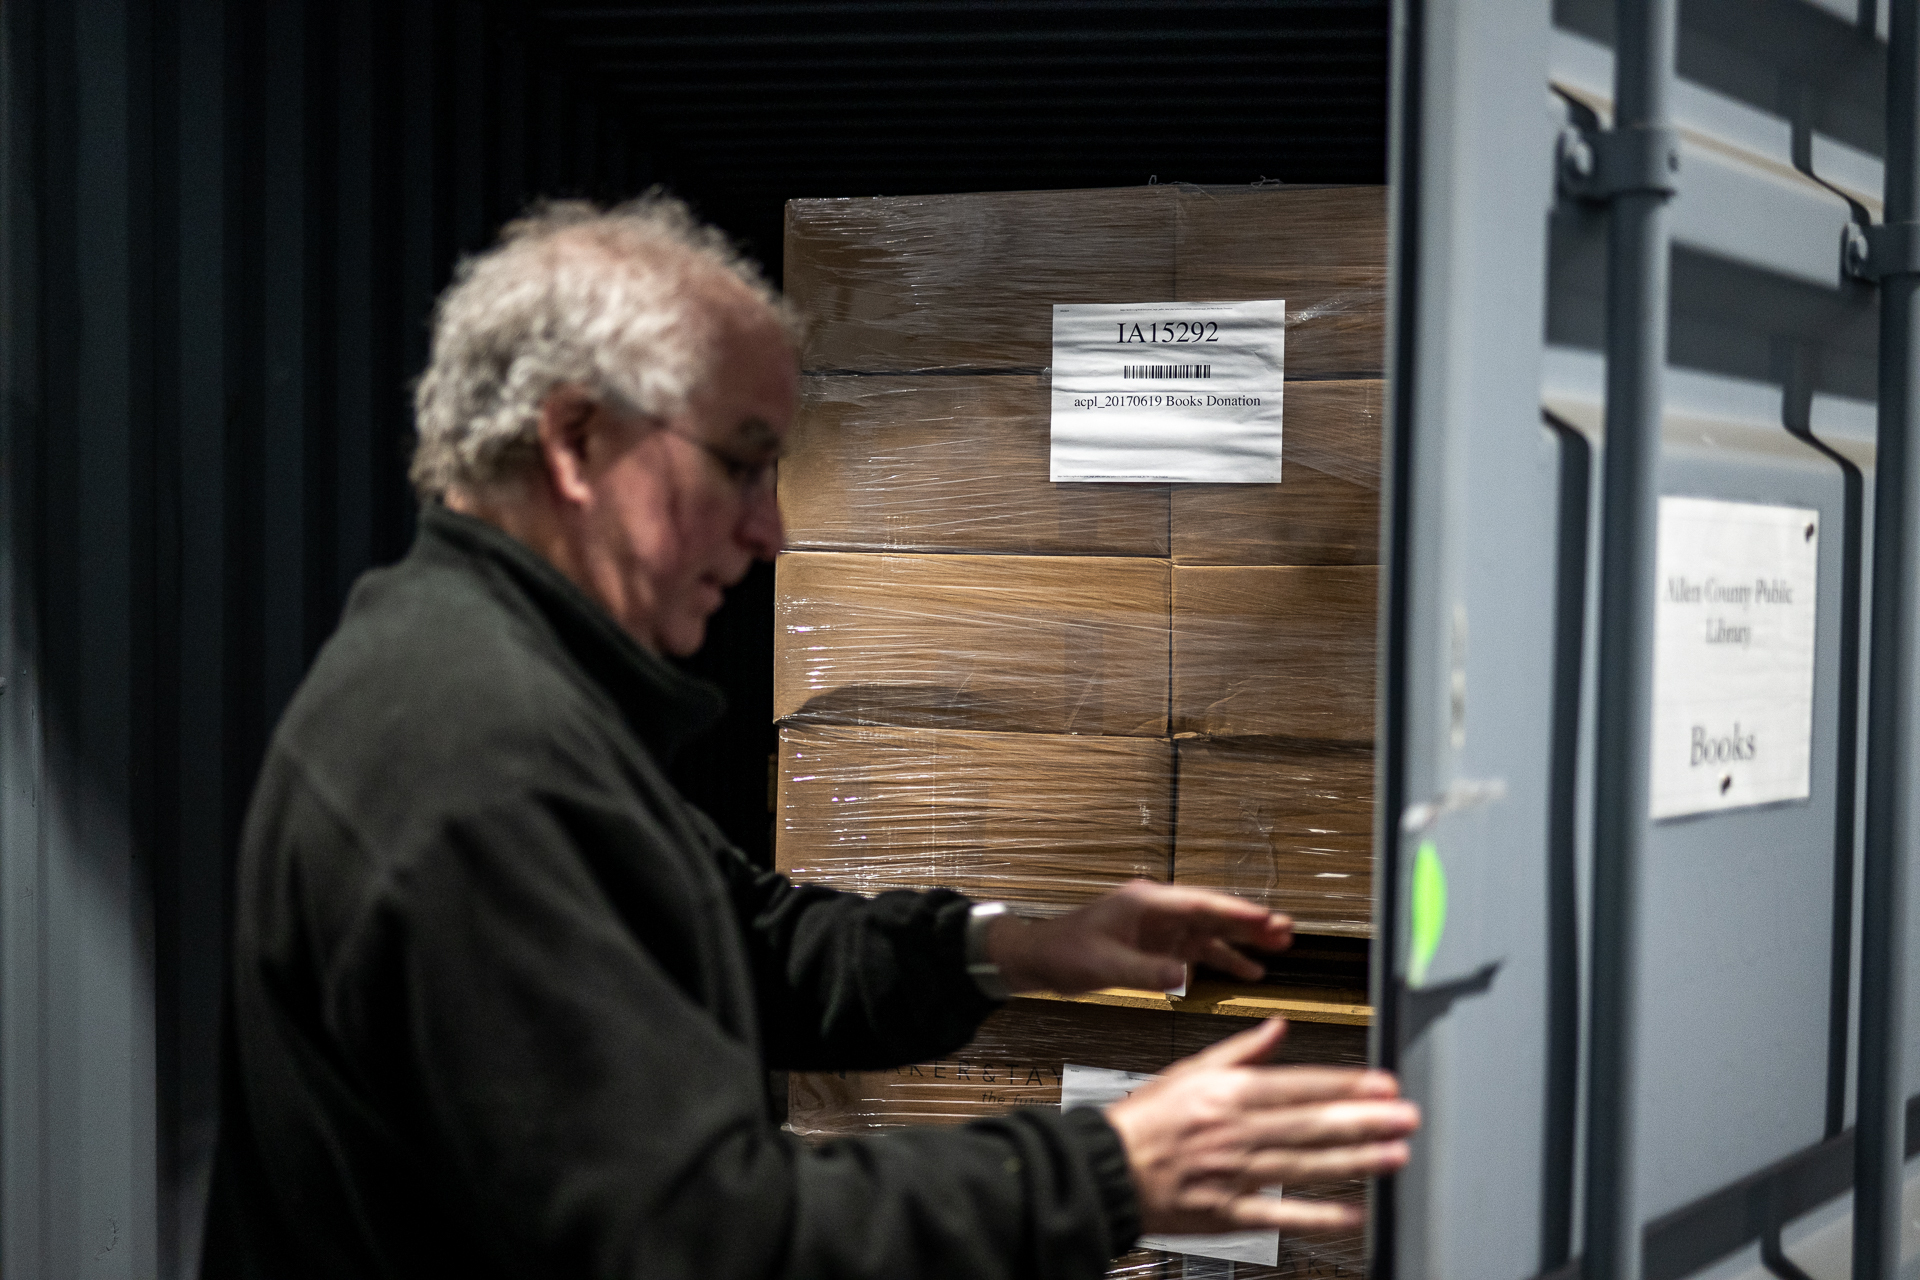 An older white man with grey-white hair wearing a dark sweater reaches out to close a grey metallic door as huge cardboard boxes labeled as containing books sit in the background